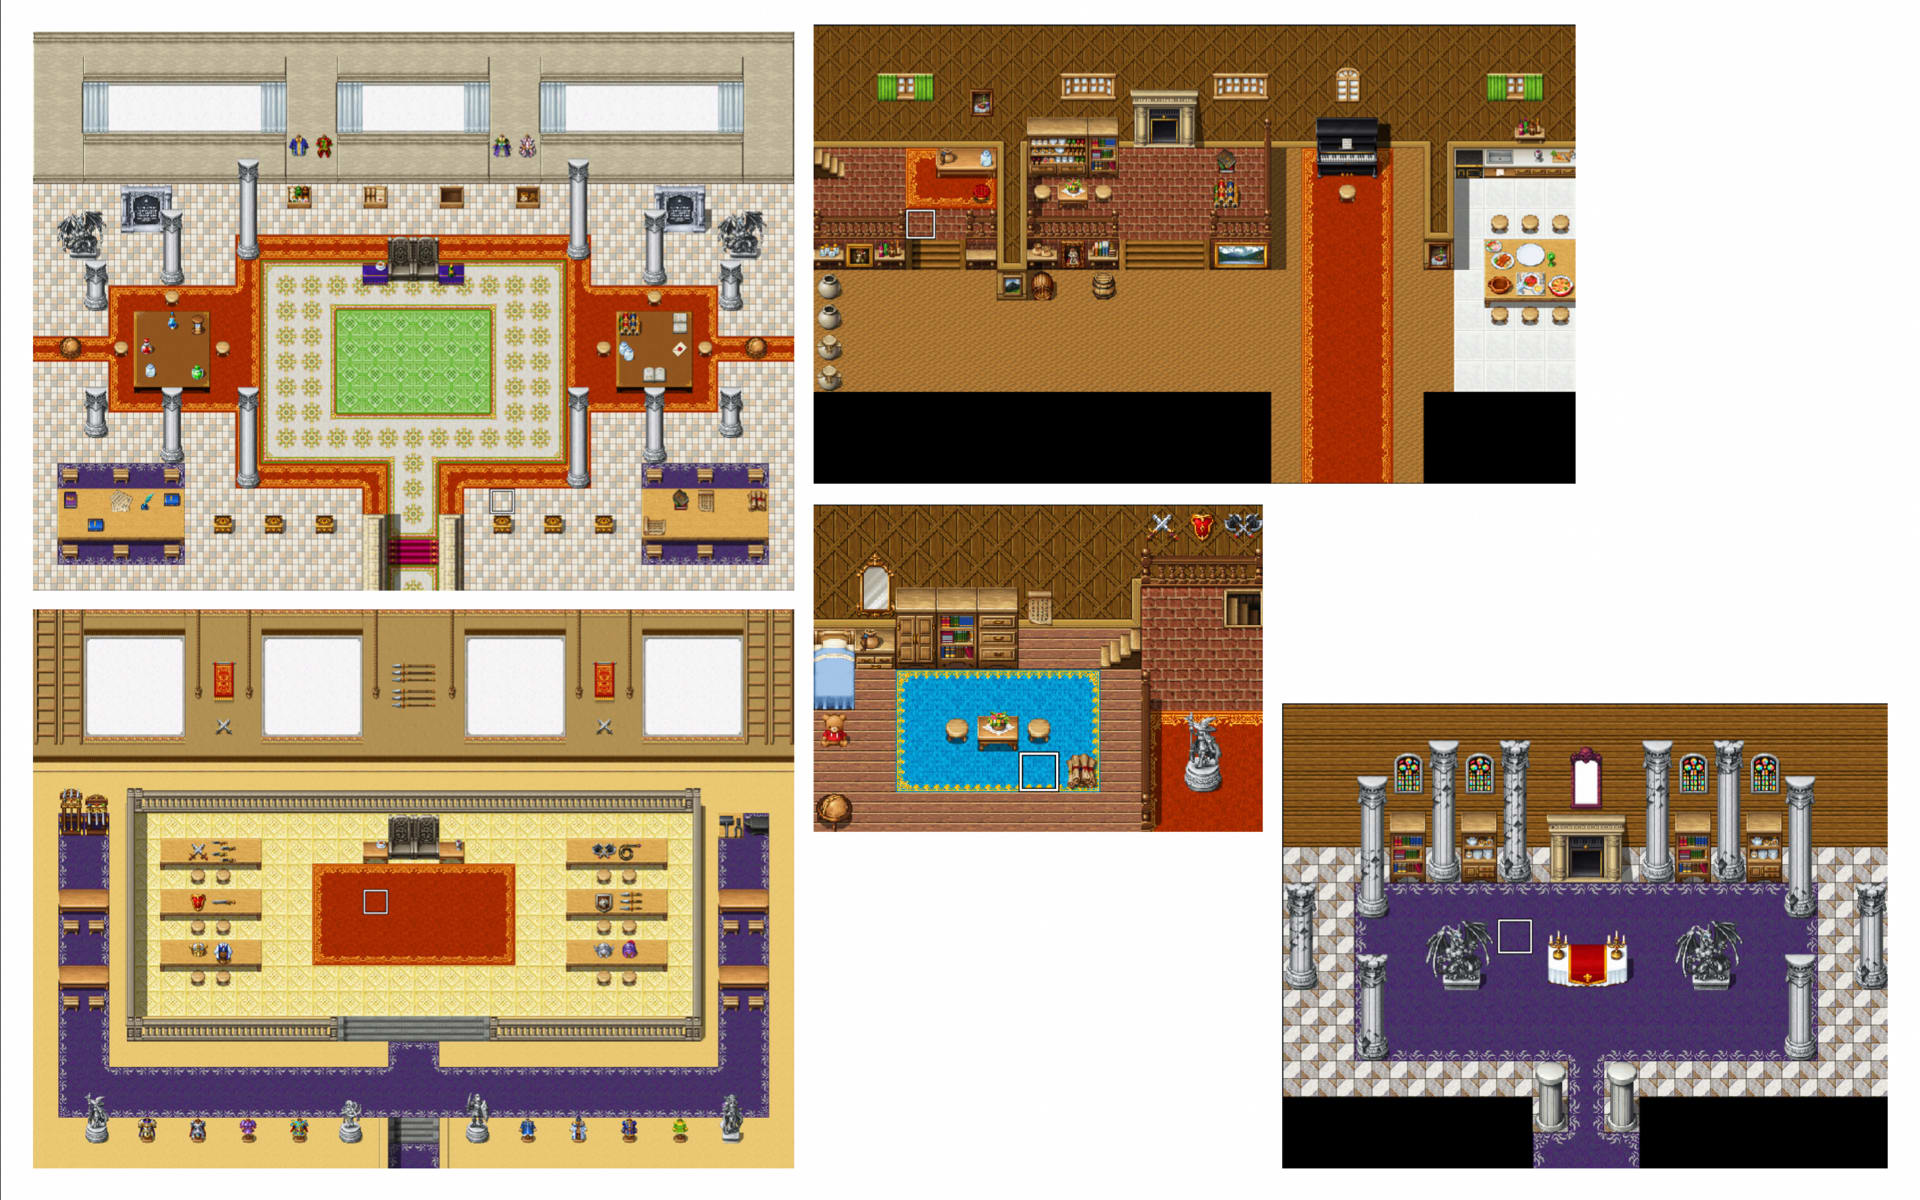 Maps of the videogame